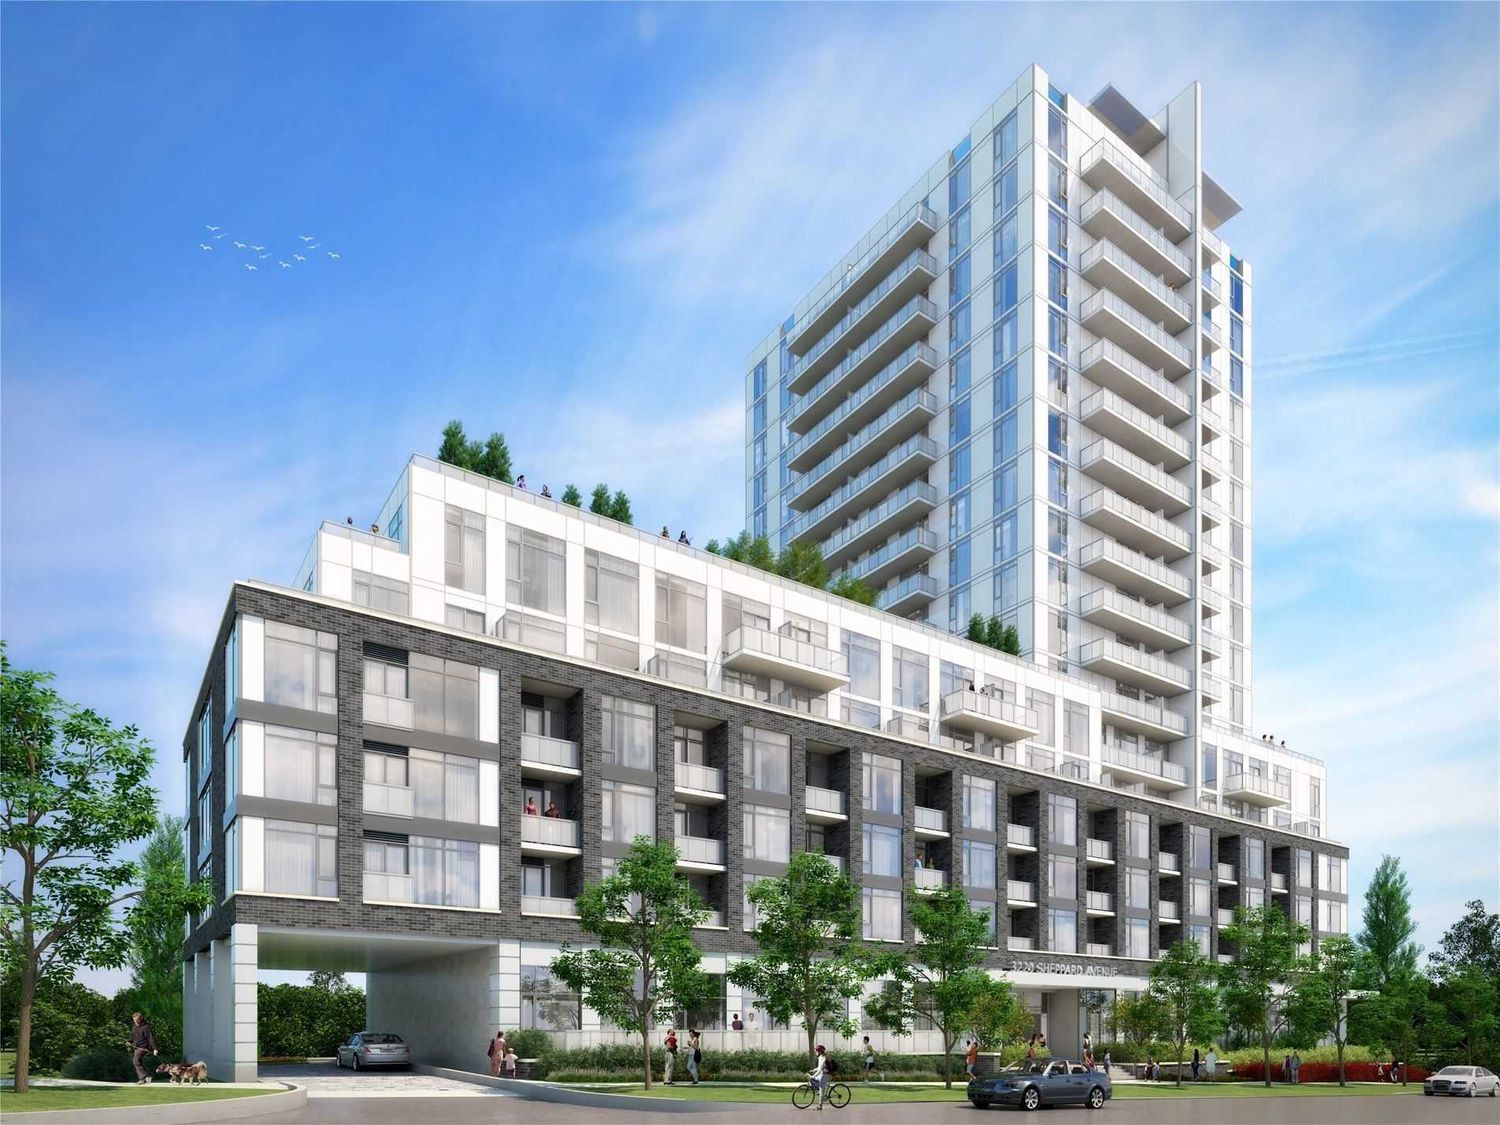 3220 Sheppard Avenue E. East 3220 Condos is located in  Scarborough, Toronto